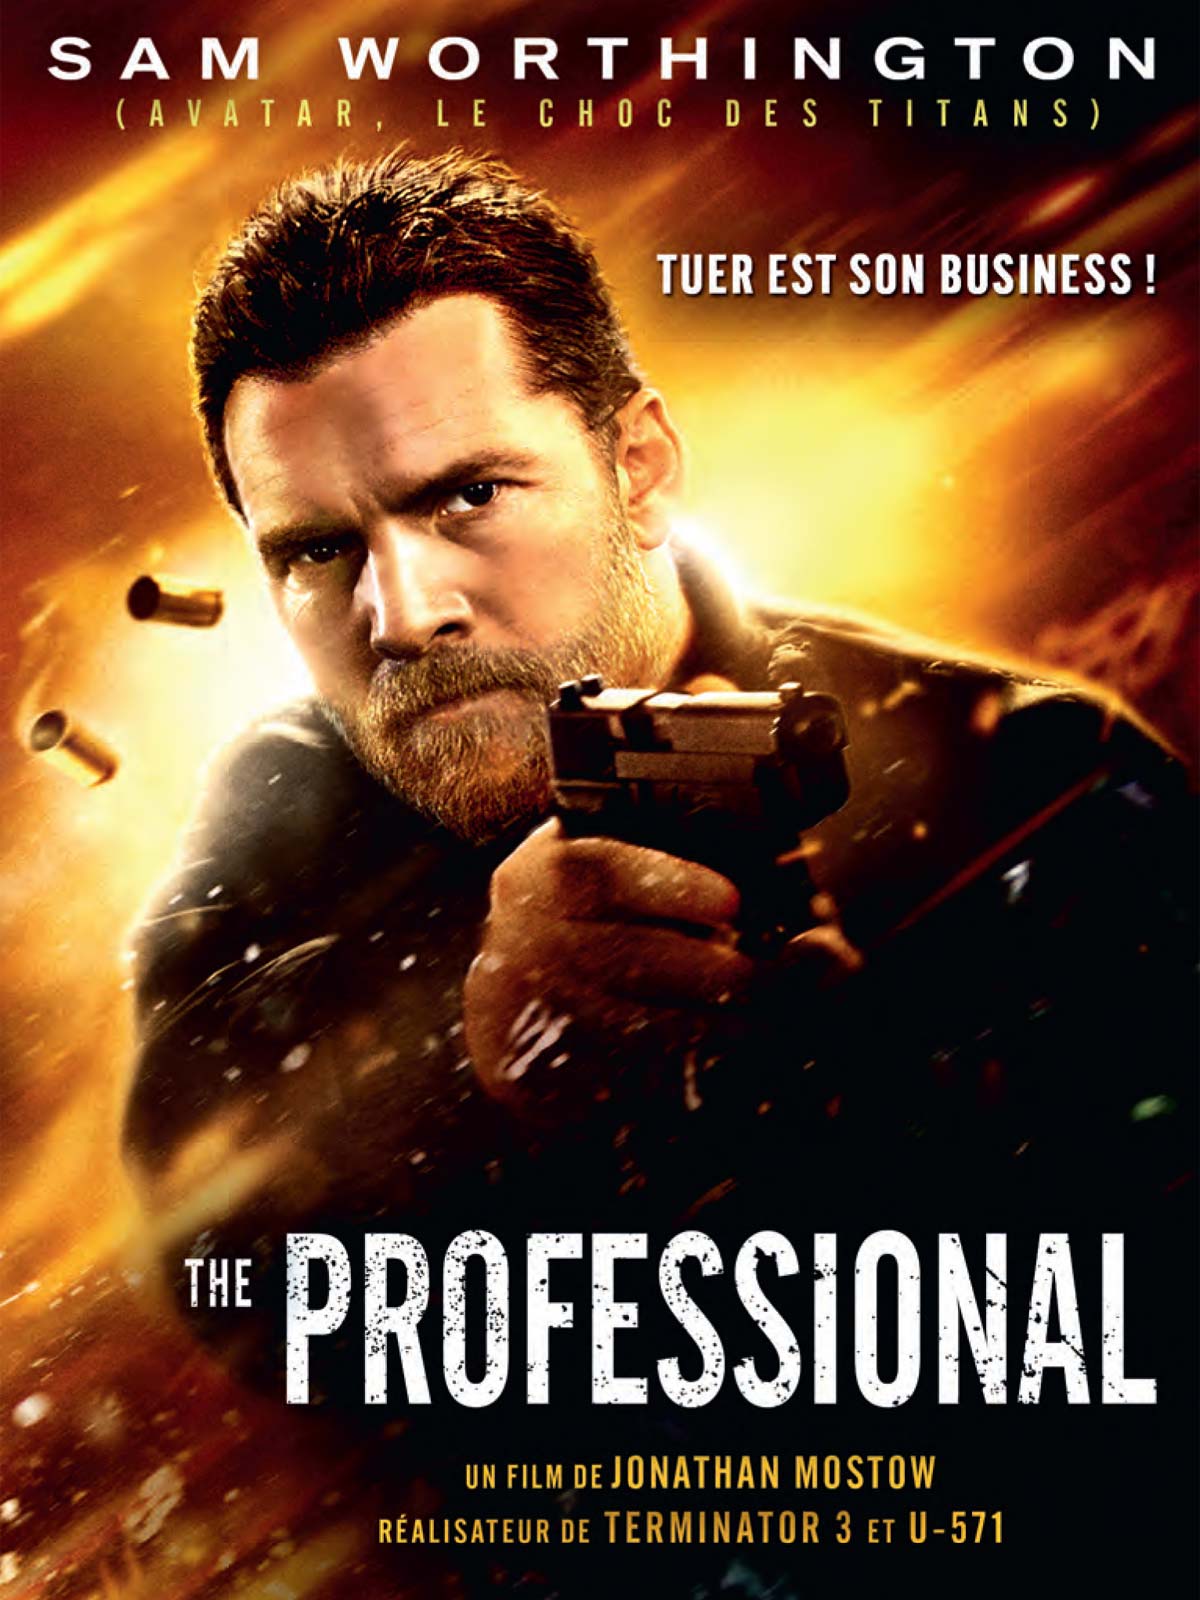 the professional movie reviews